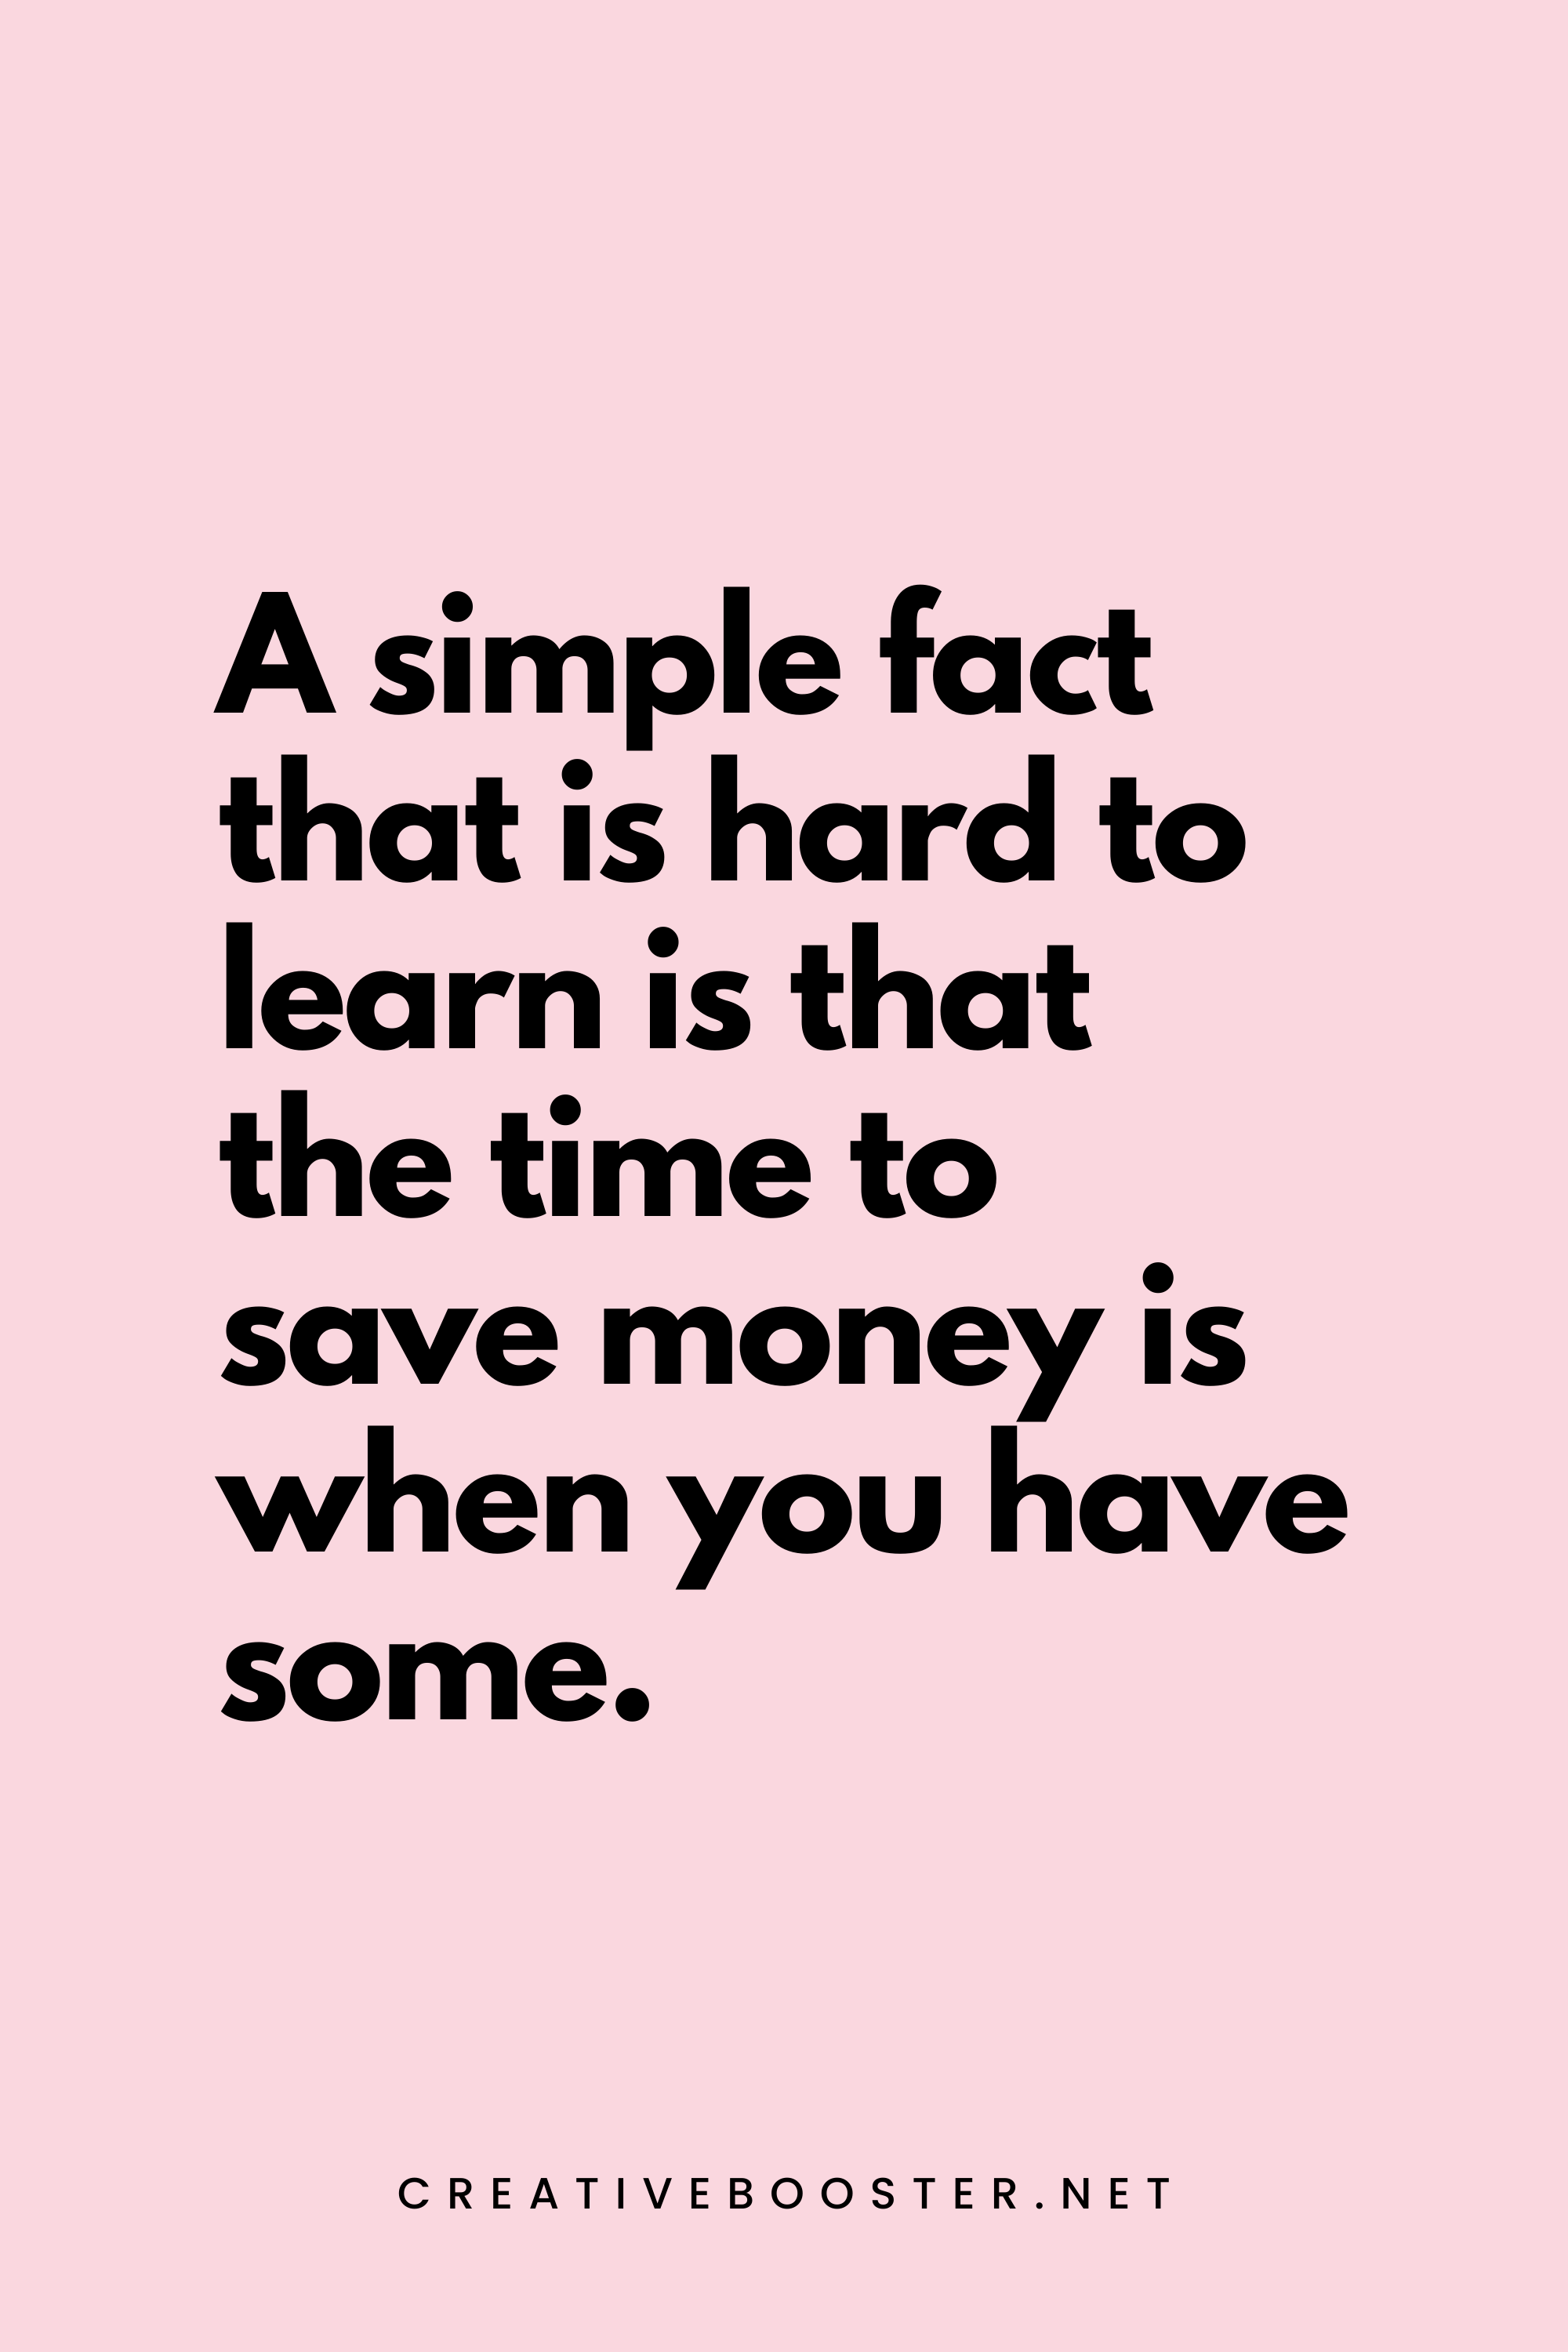 8. A simple fact that is hard to learn is that the time to save money is when you have some. - Joe Moore - 1. Popular Financial Freedom Quotes